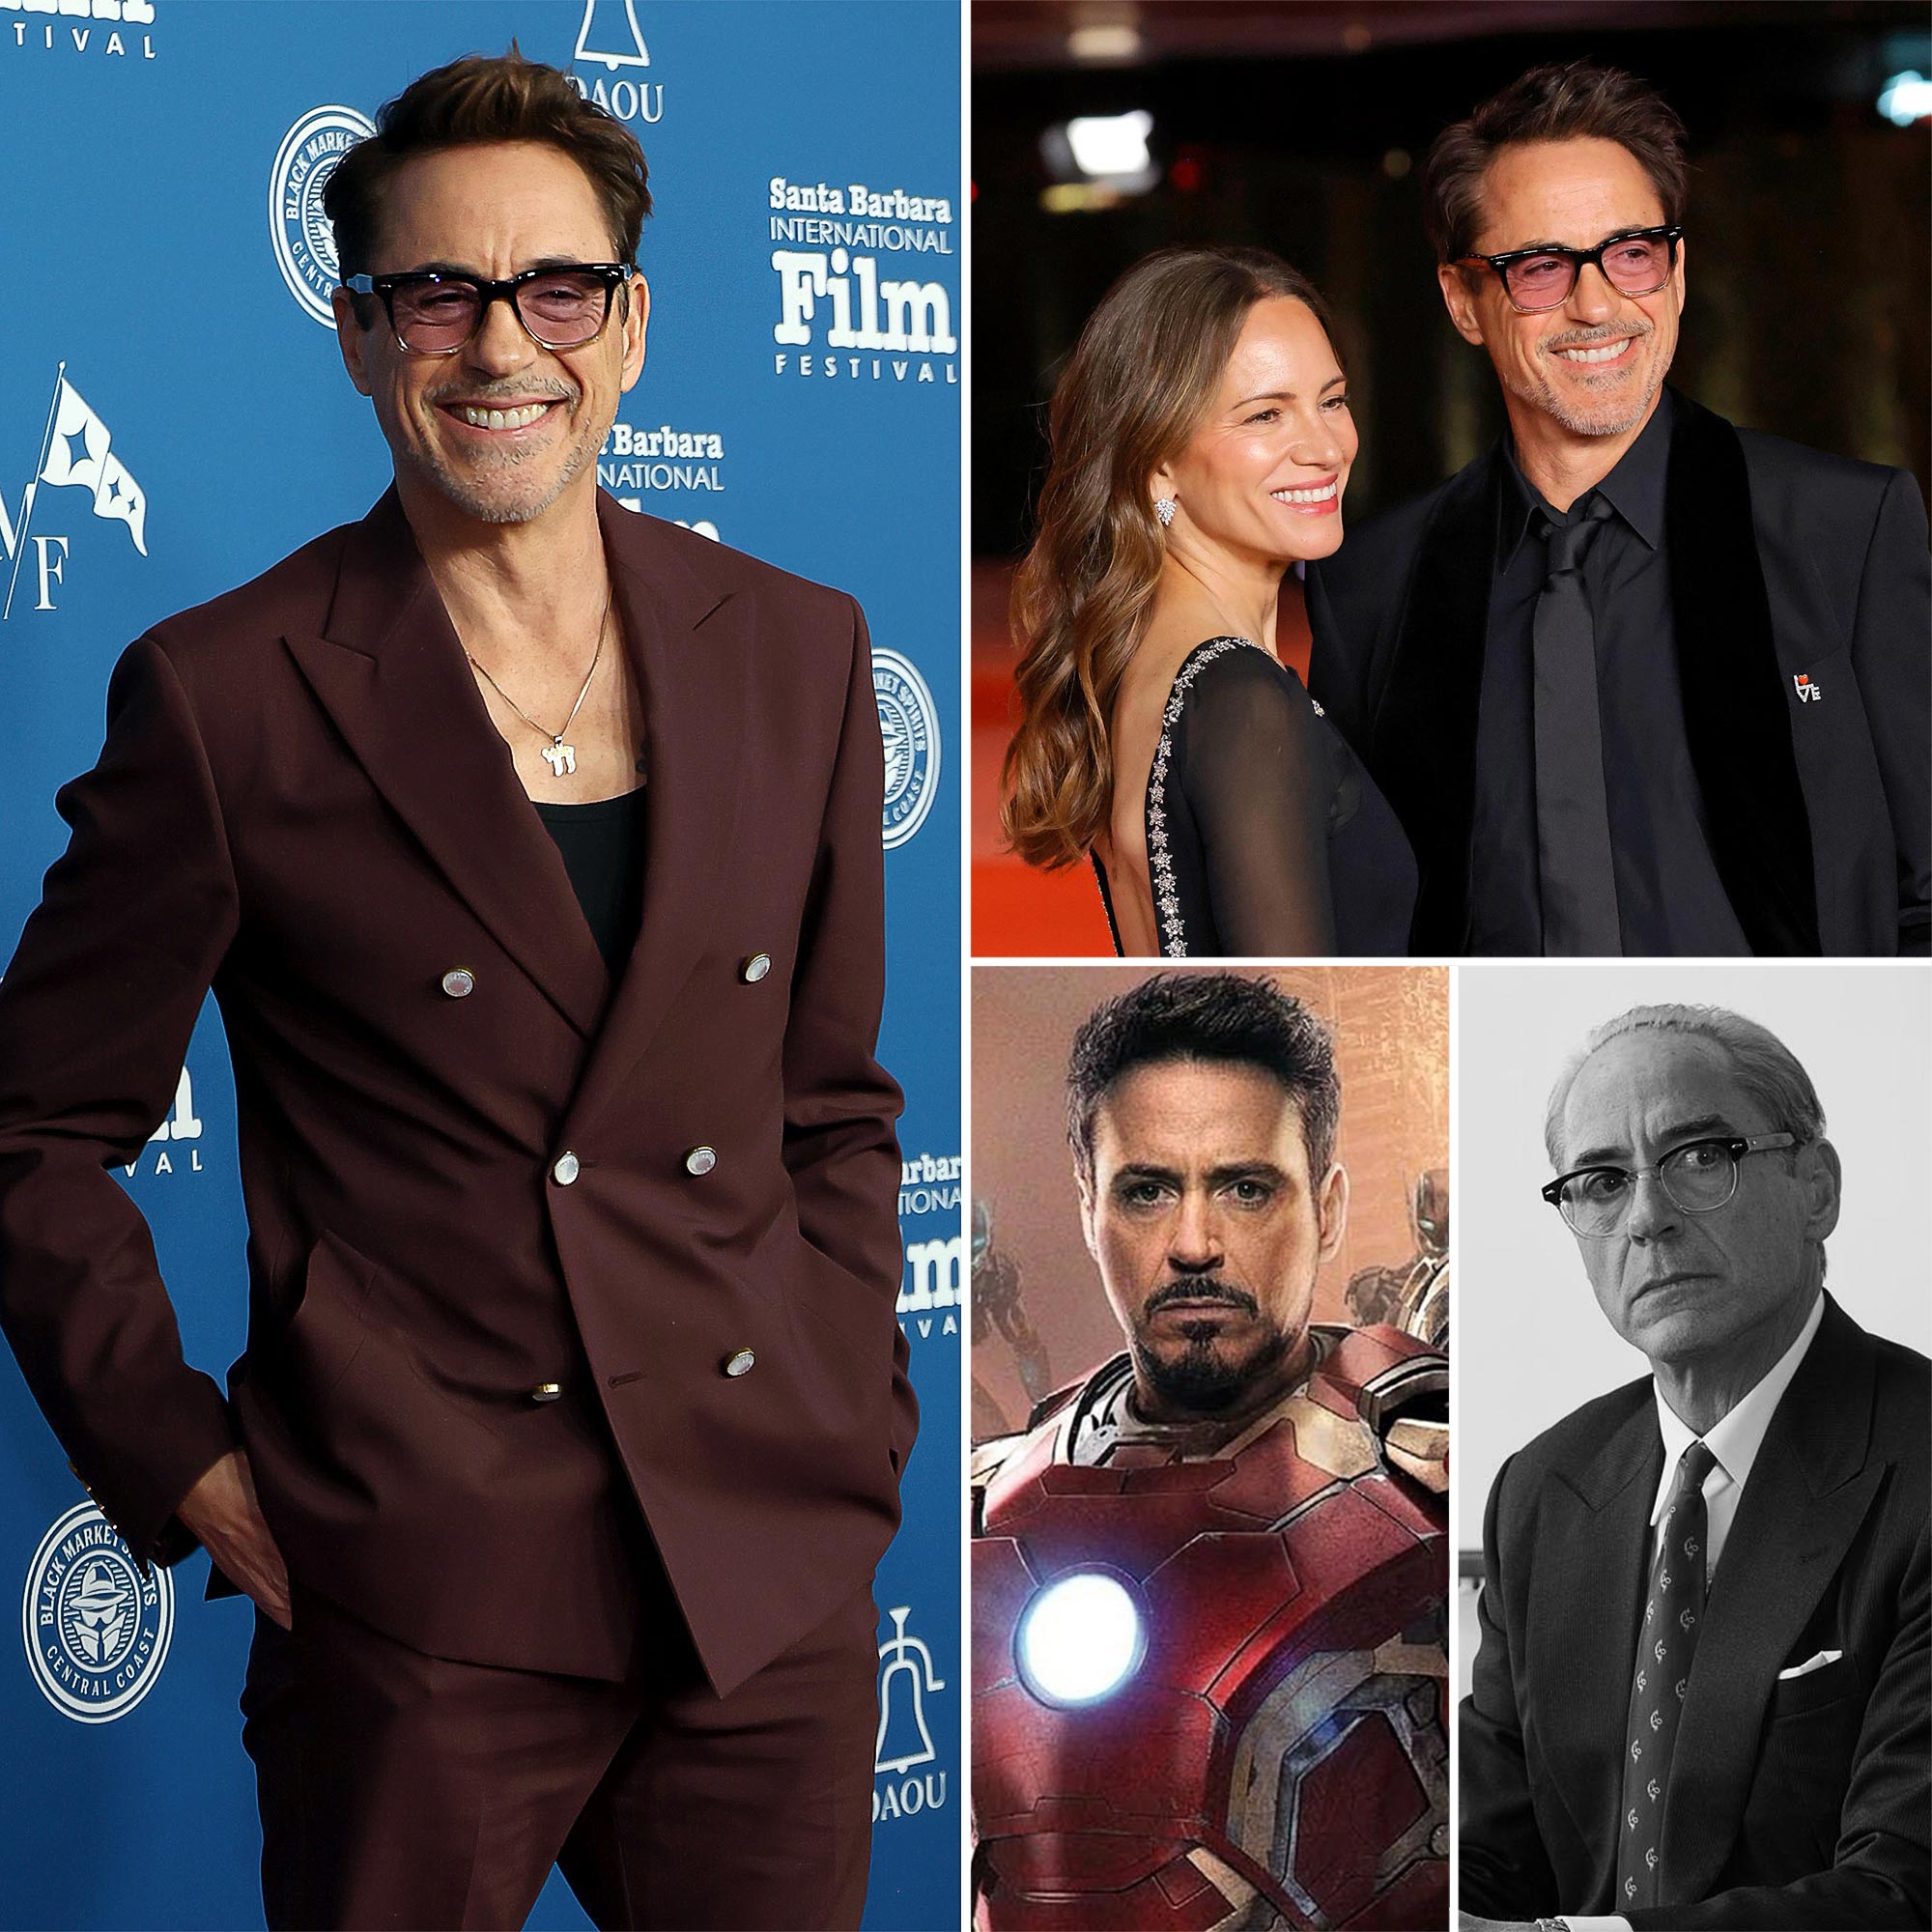 Robert Downey Jr. Through the Years: His Life in Photos